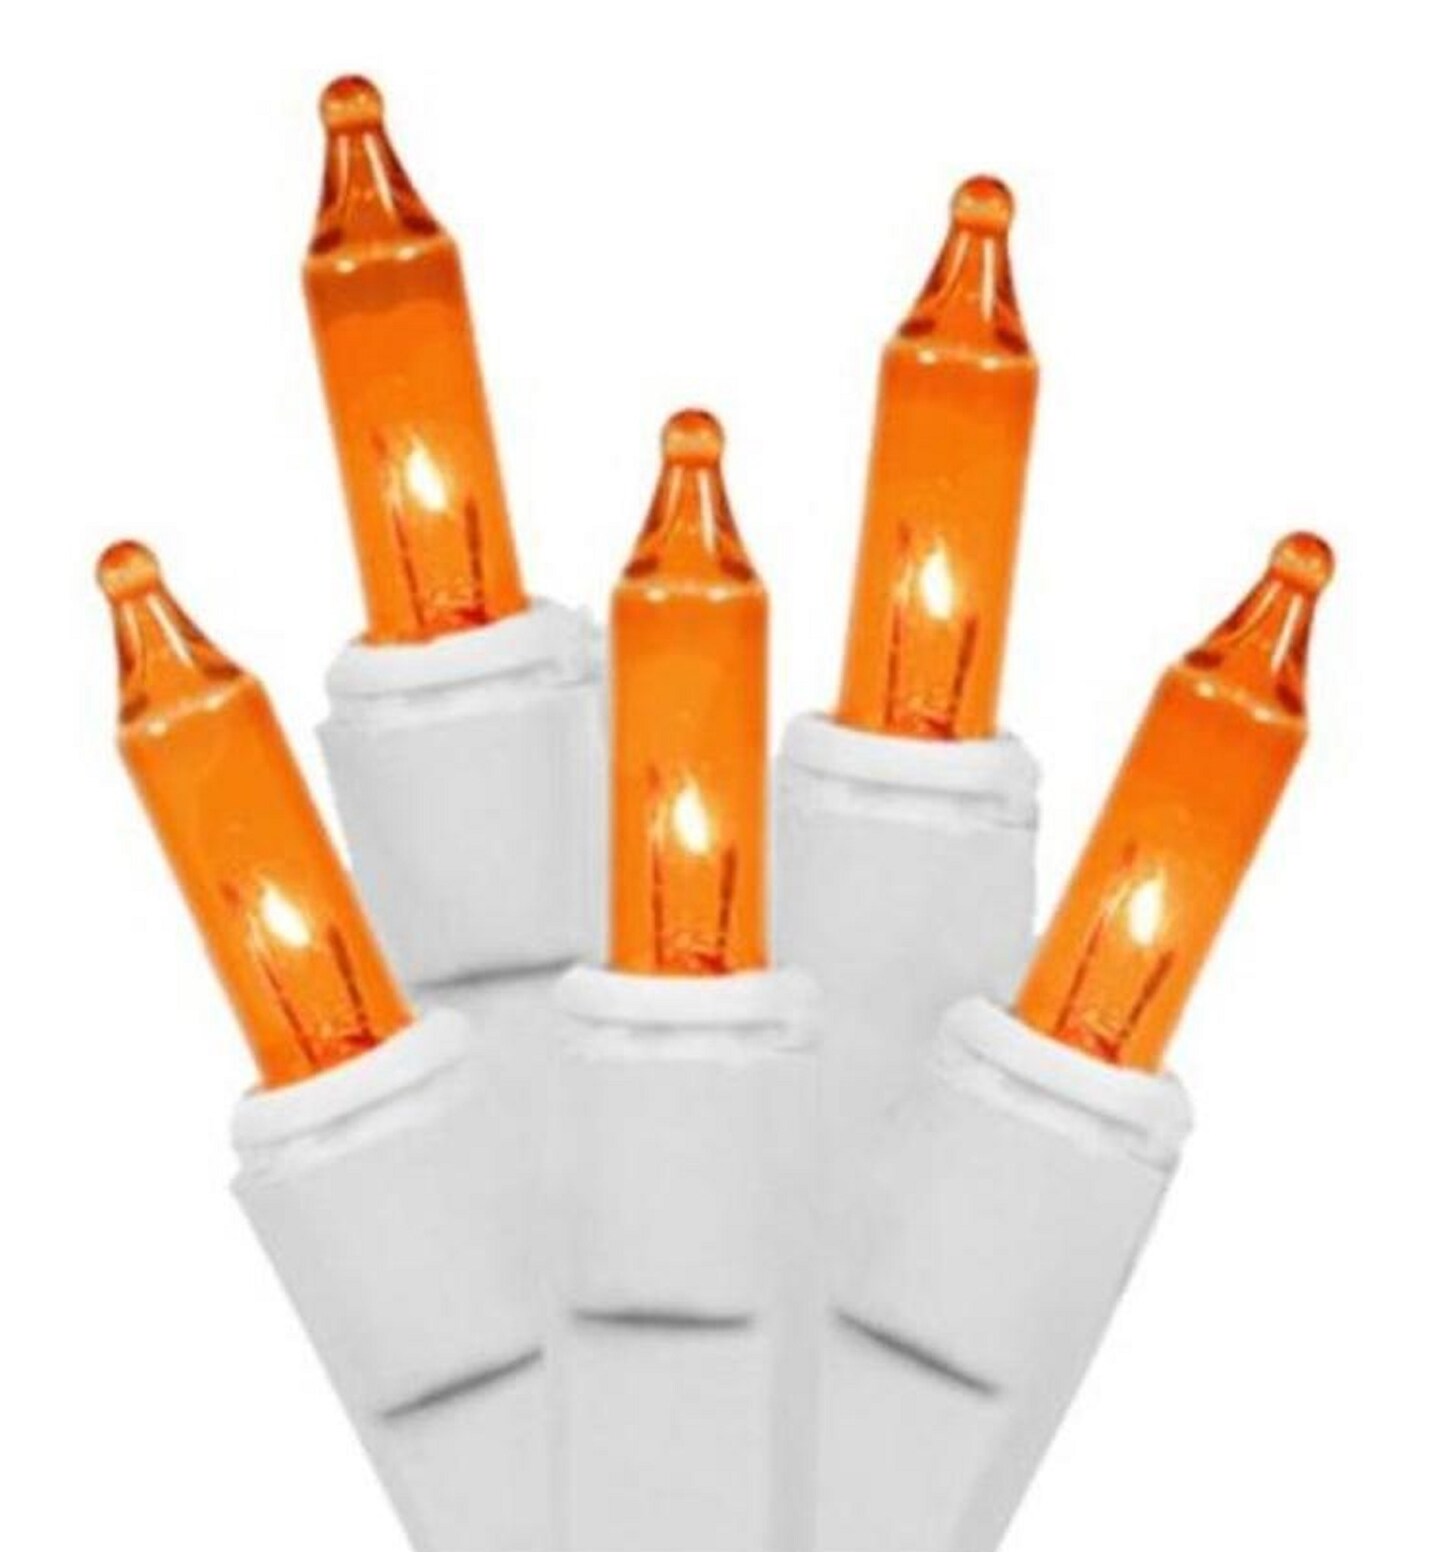 Merry and Light 50-Count Orange Steady Mini Christmas Light Set, 9.1ft White Wire